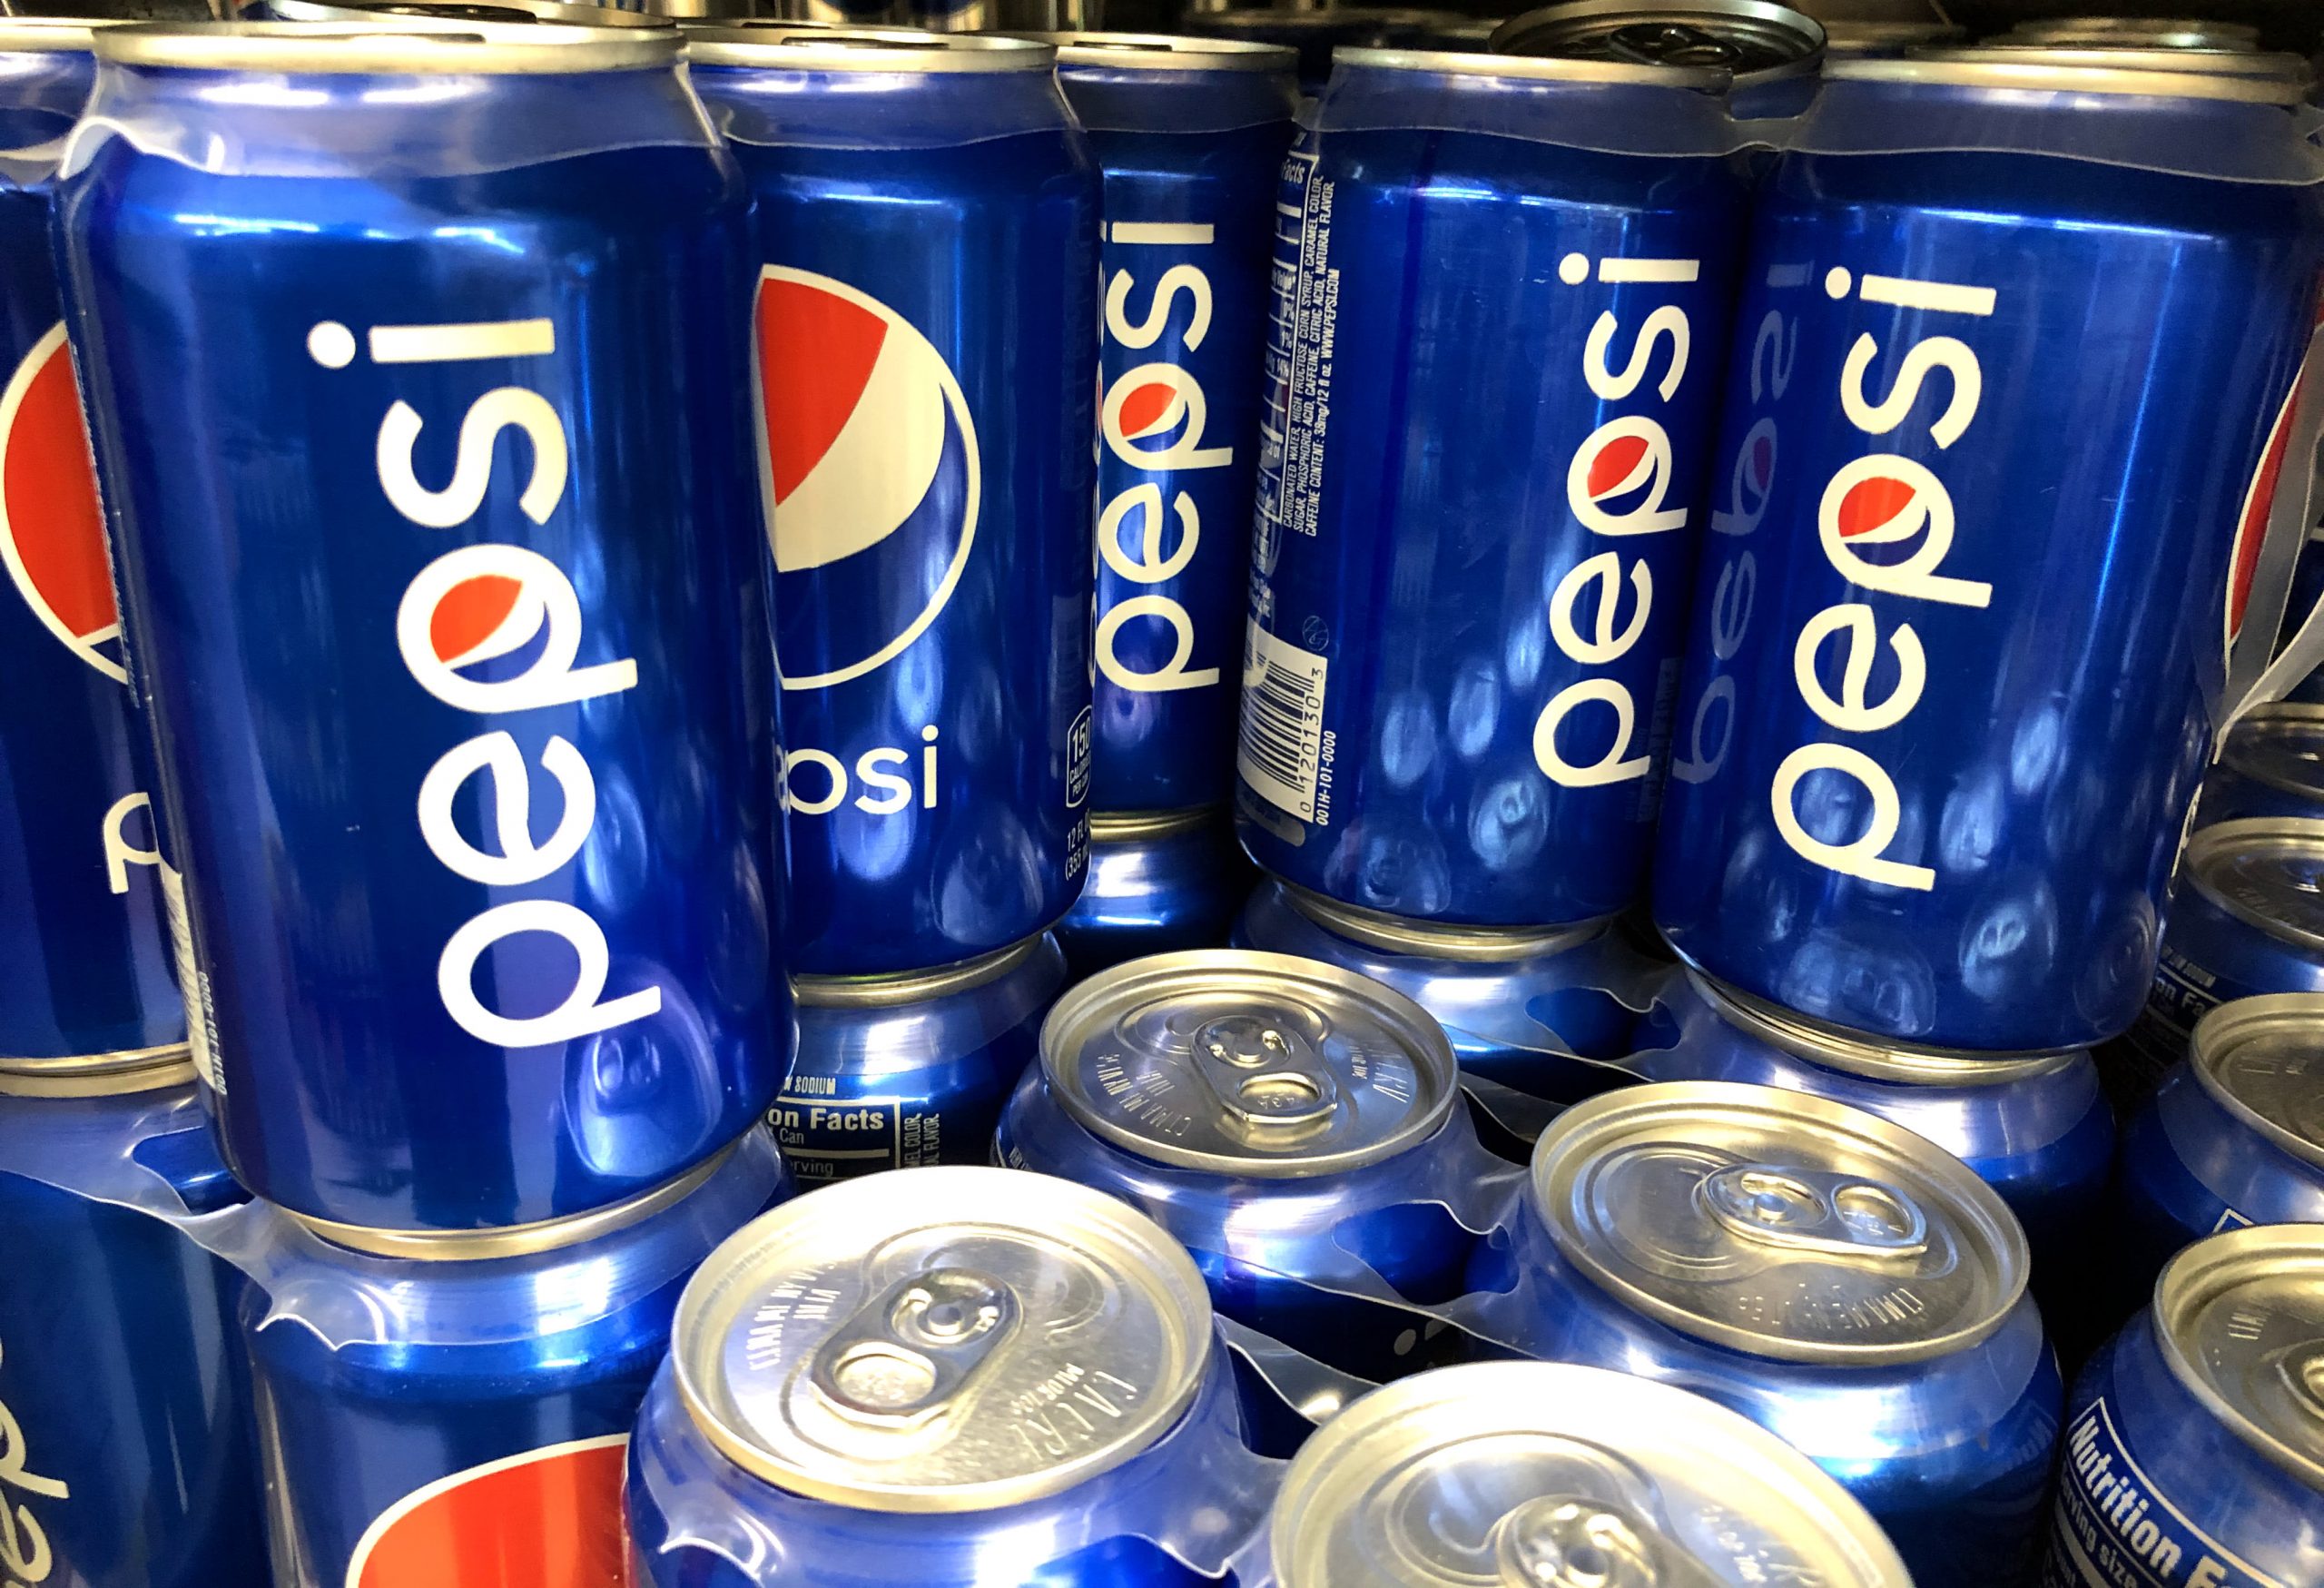 Pepsico Revenue Falls 3% As Pandemic Hits Beverage Sales But Boosts Snacks Business photo